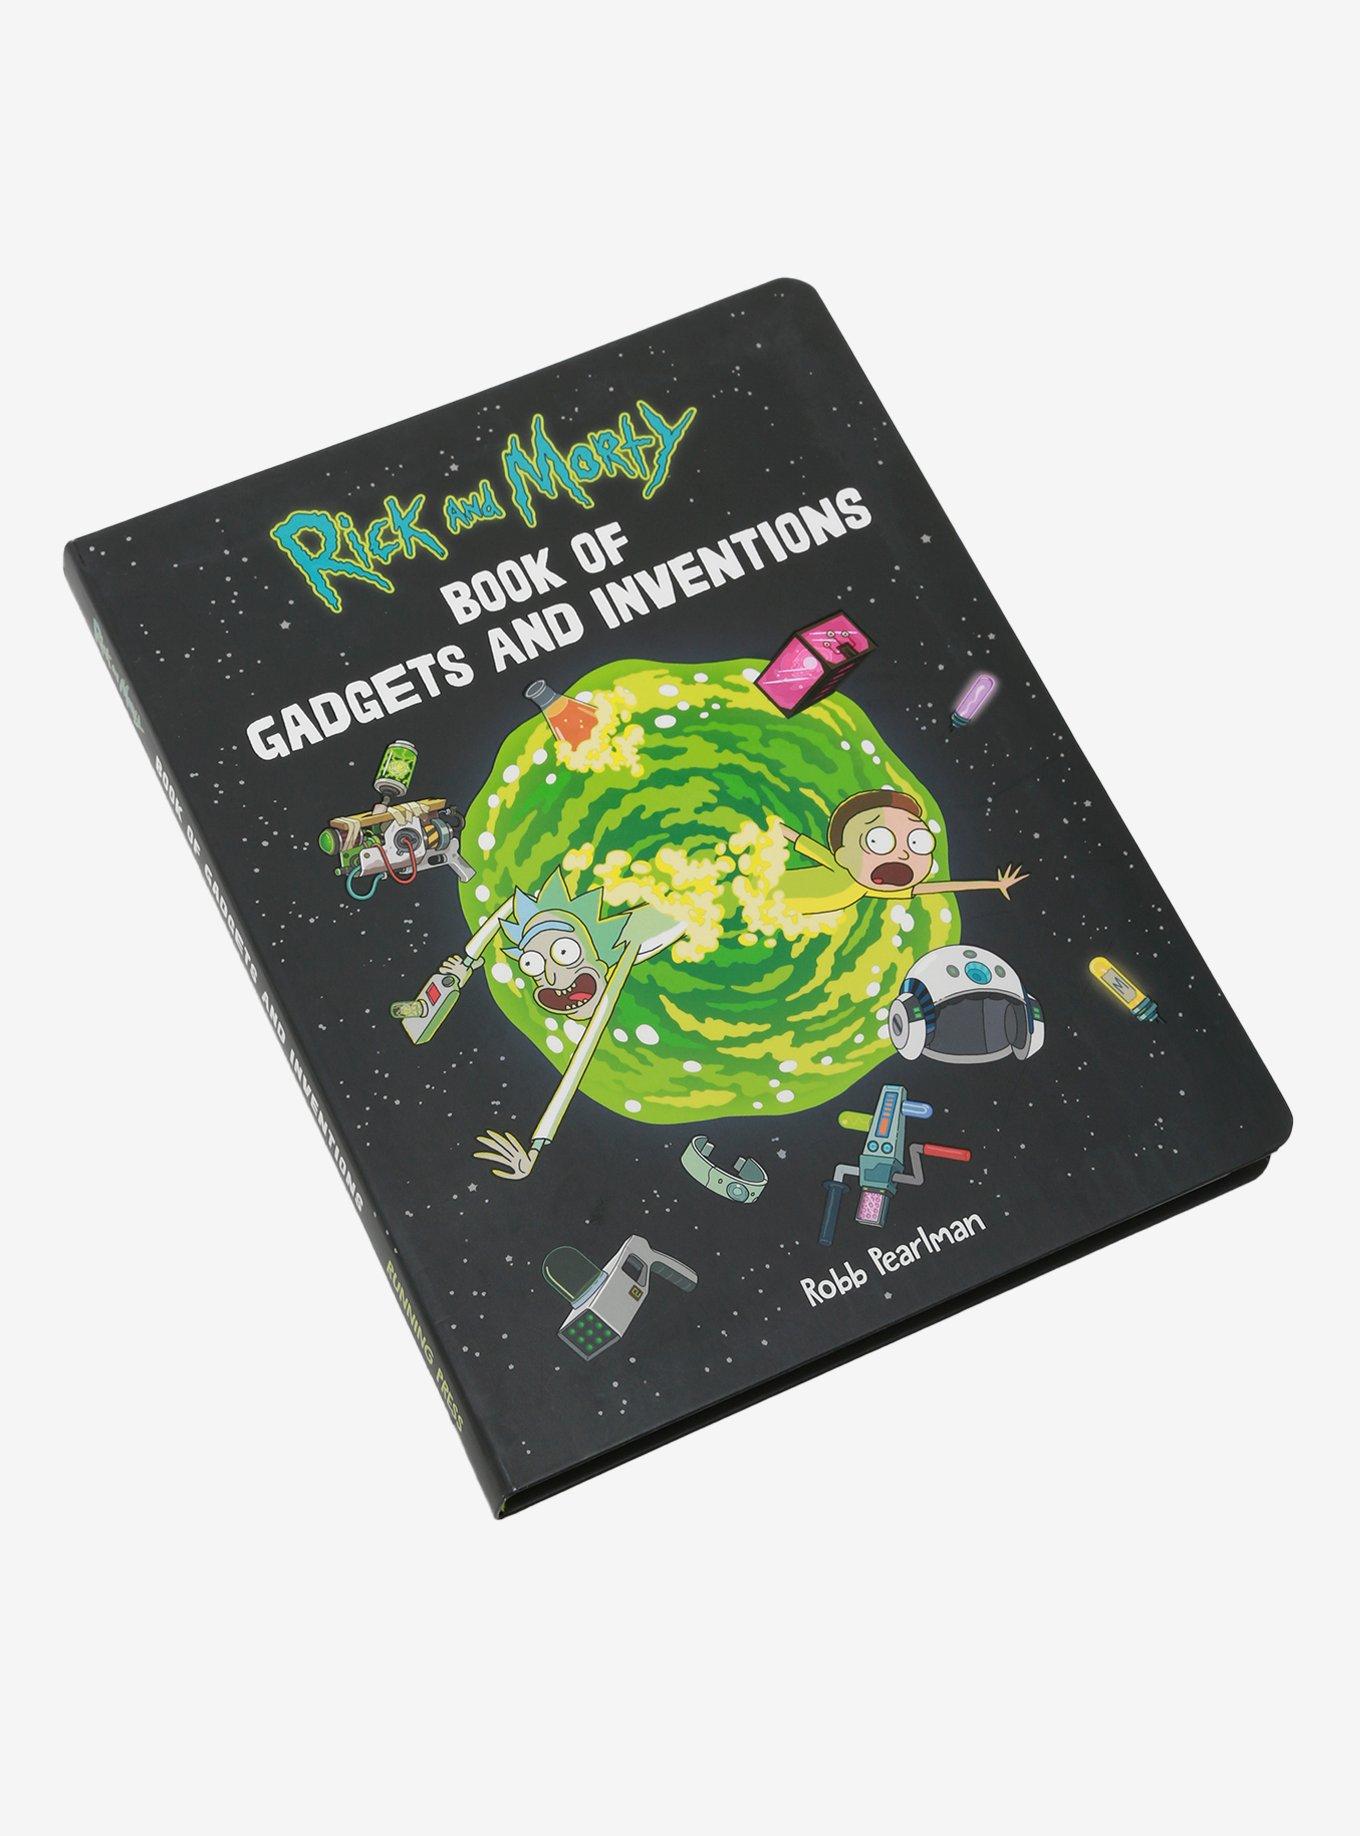 Rick and Morty' Gadgets: All Of Rick Sanchez's Inventions